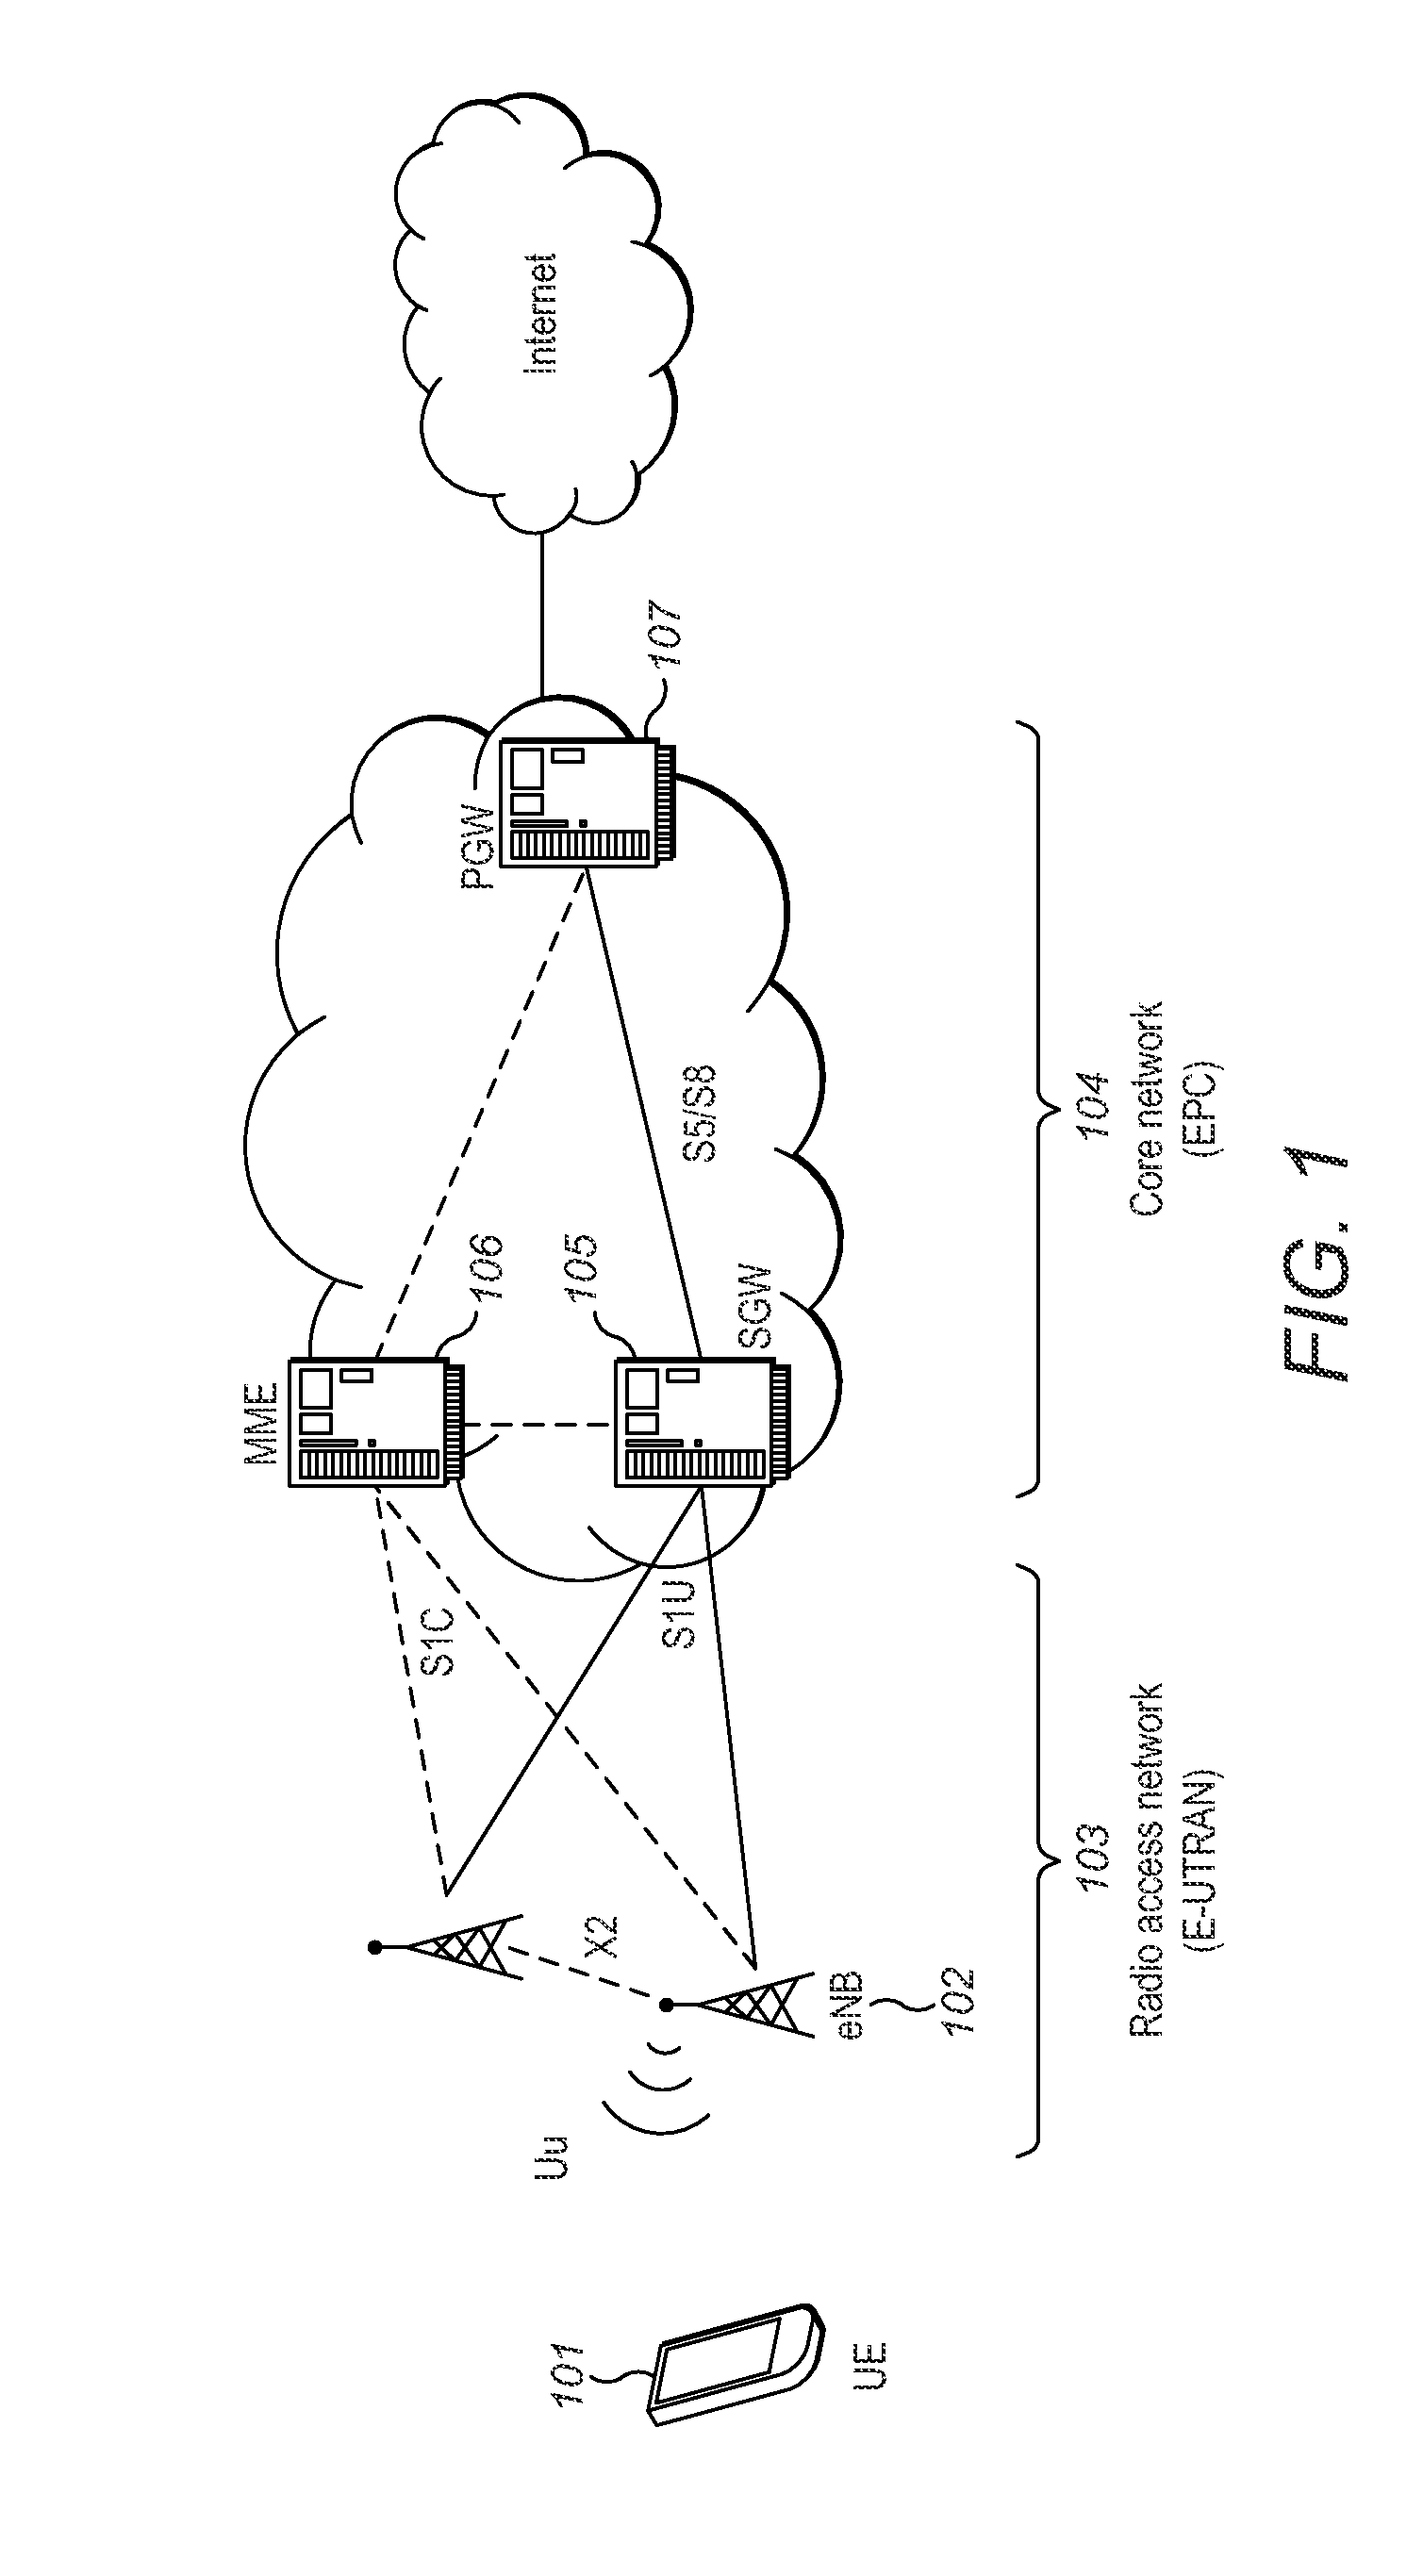 Method Implemented in an eNodeB Base Station